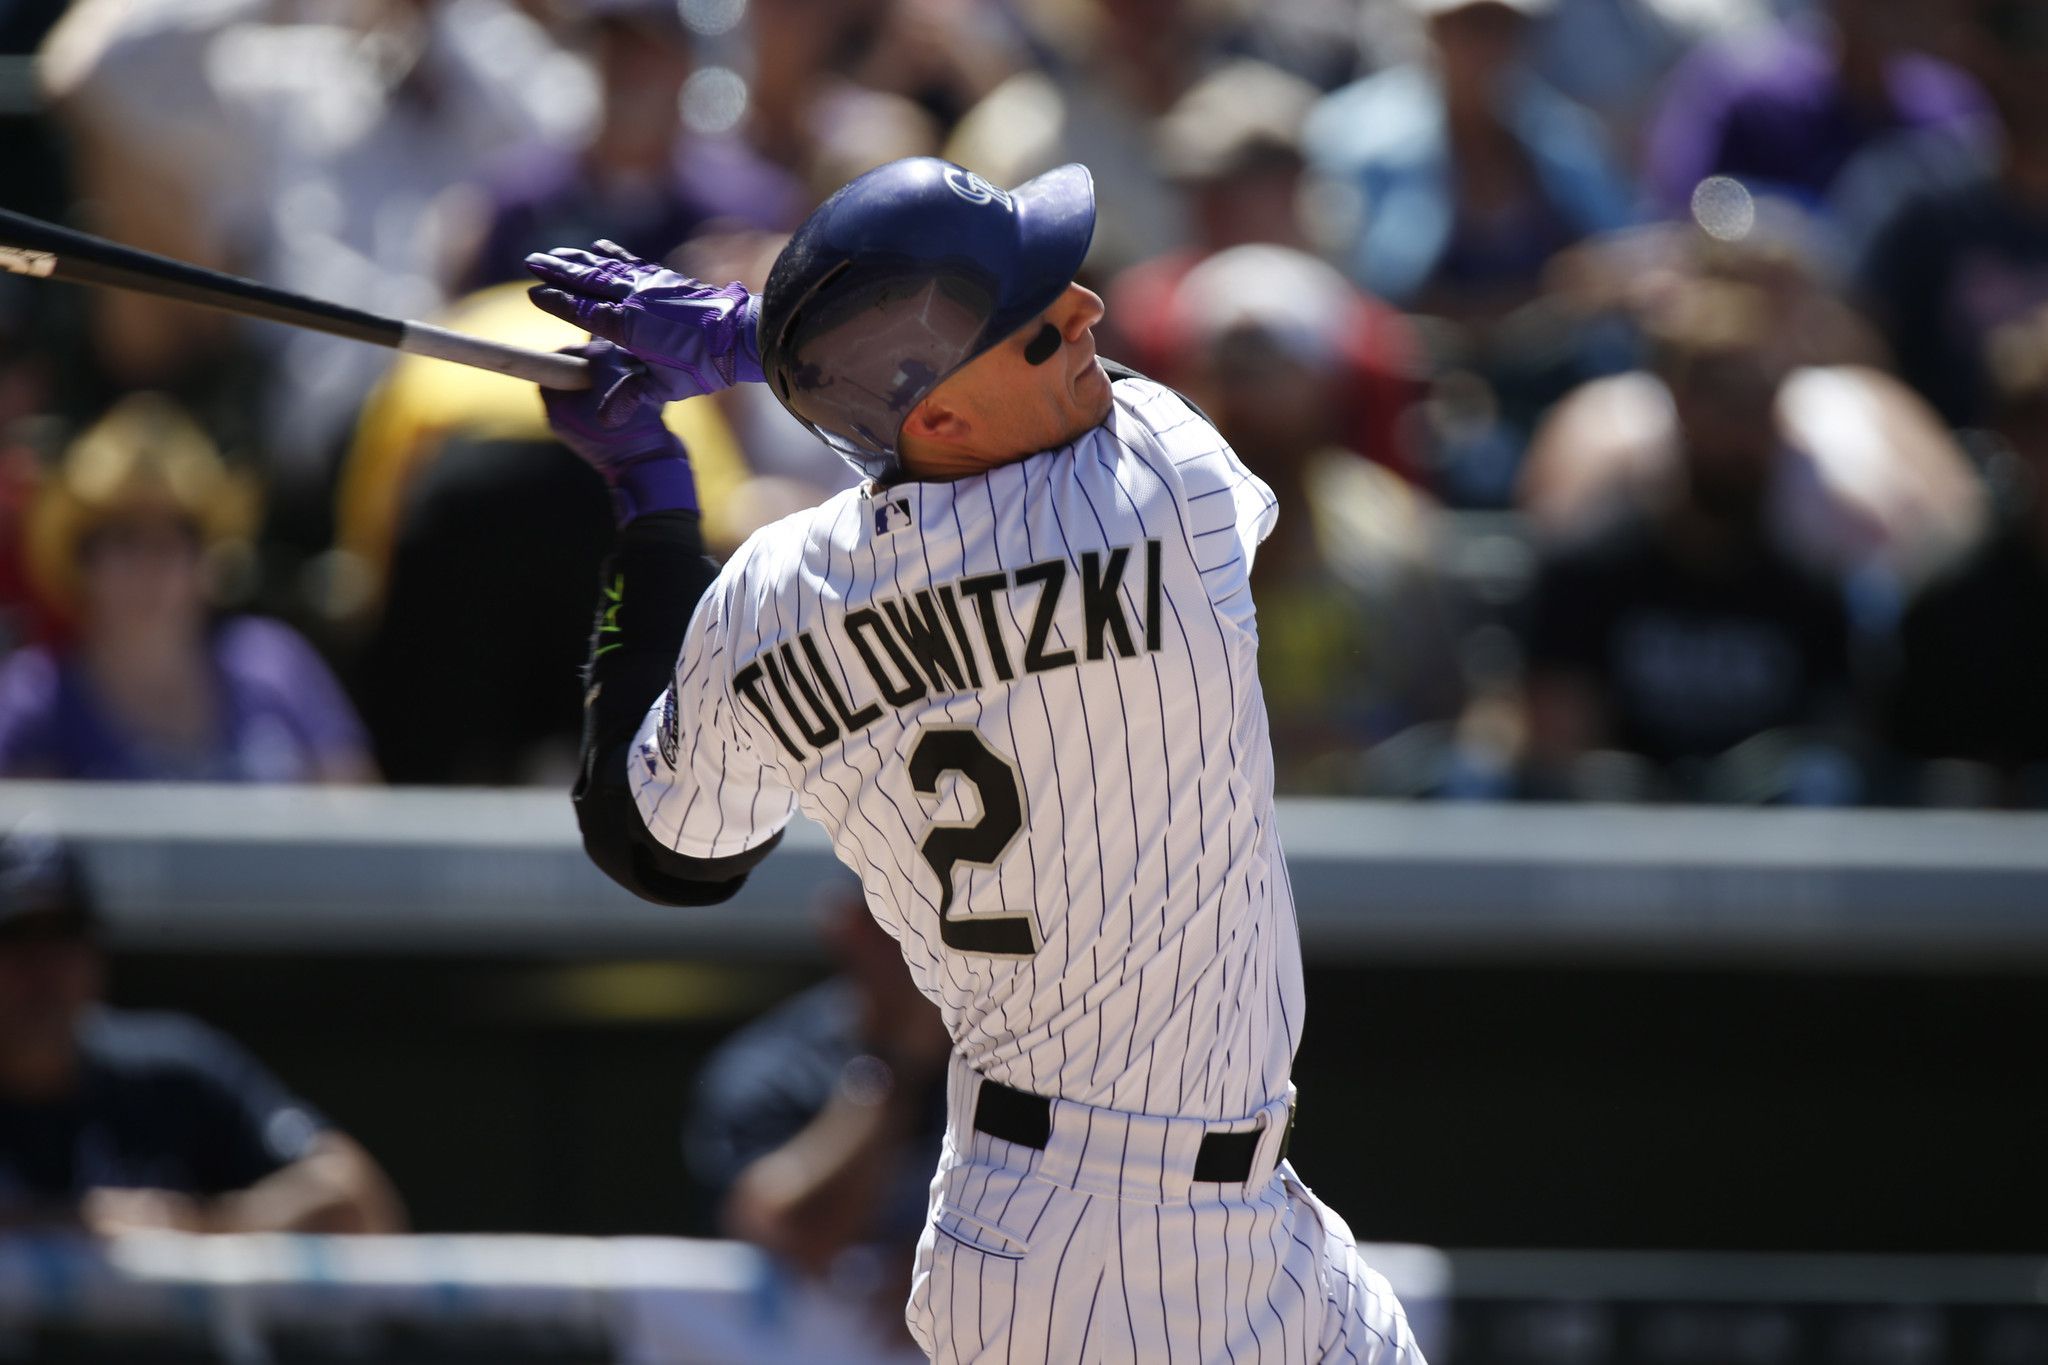 Troy Tulowitzki makes the Blue Jays even more dangerous to the Orioles